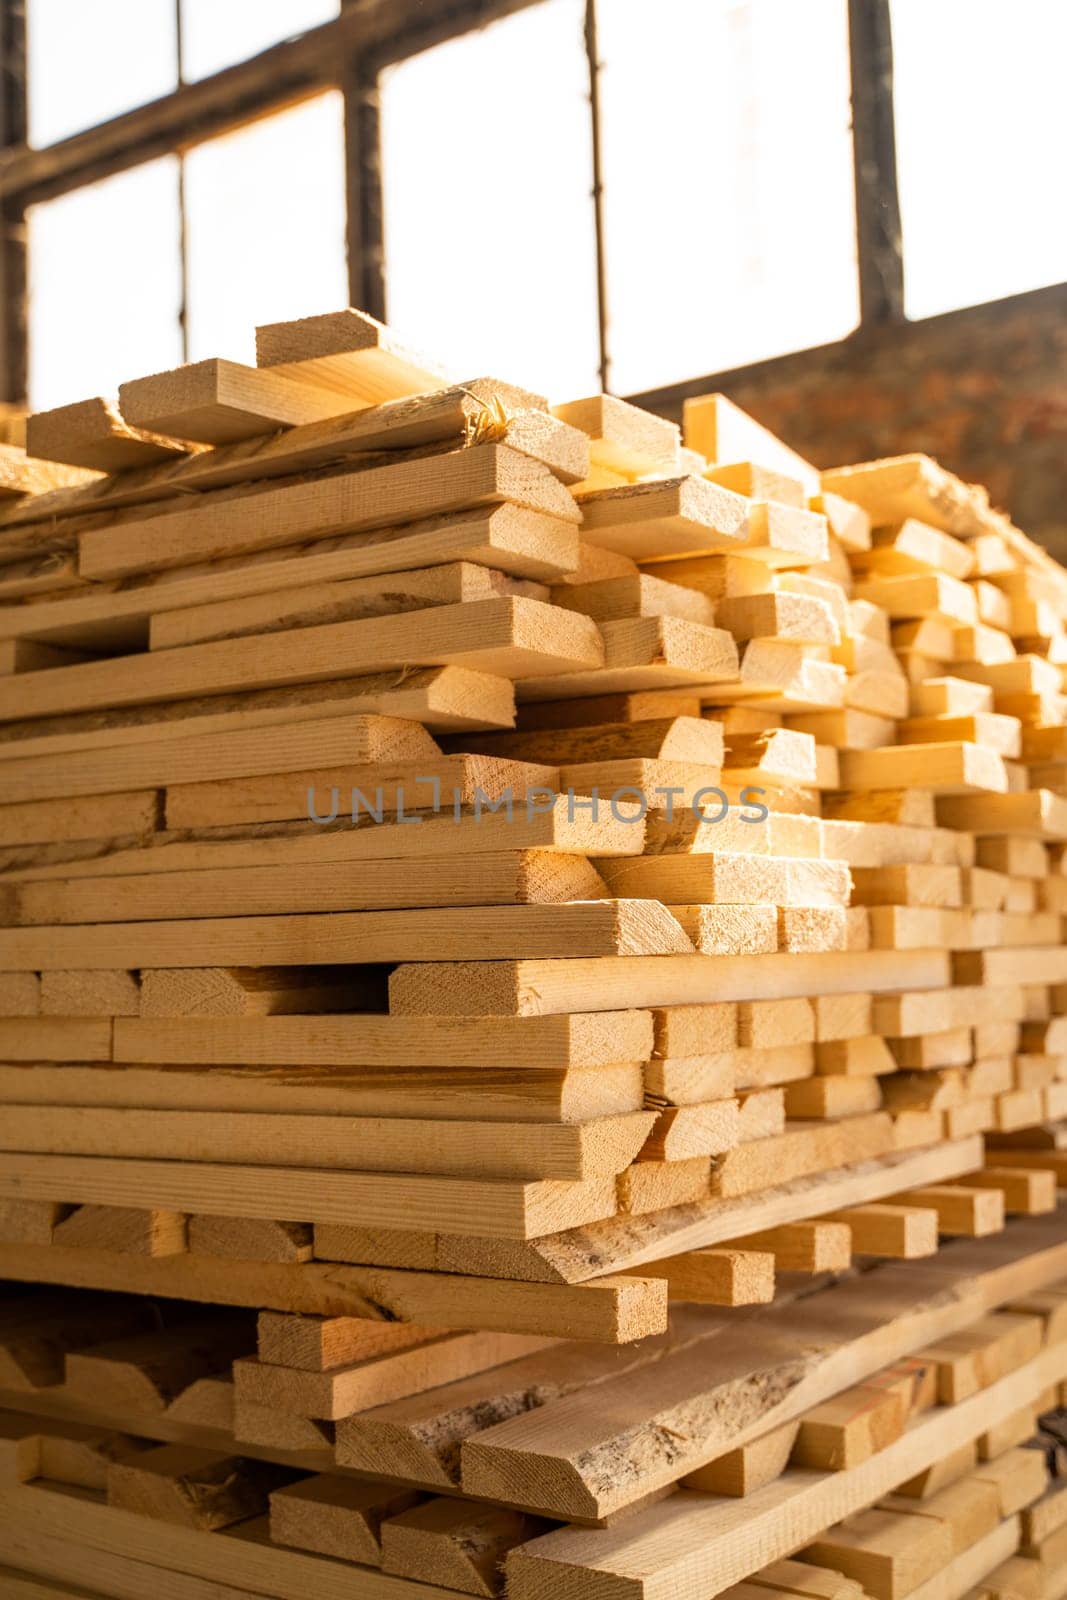 Stacked wooden planks in close-up at a outdoor lumber warehouse. Drying timber stack. Wood air drying